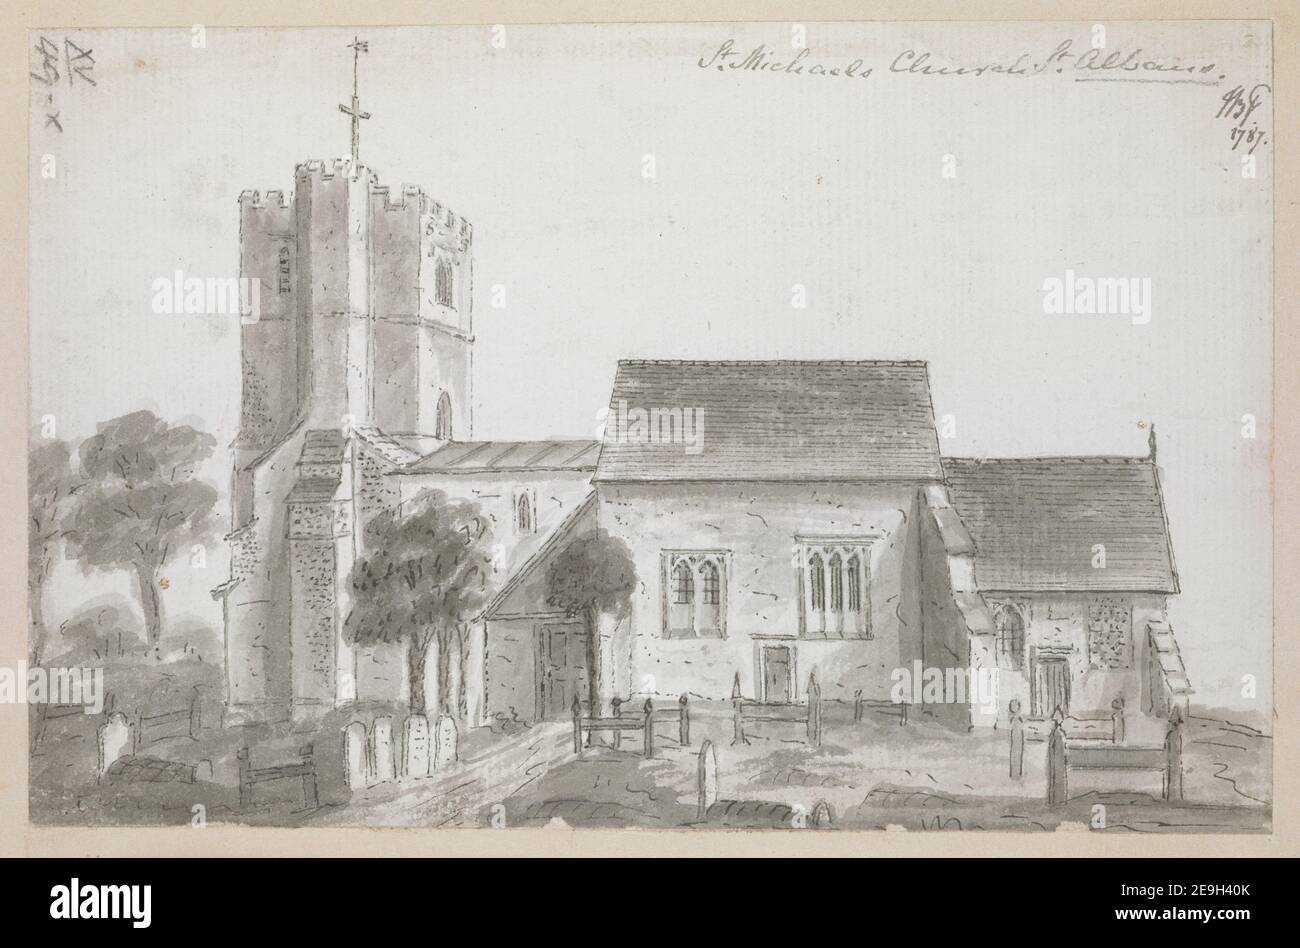 St Michael's Church St Albans.  Author  Baskerfeild, Thomas 15.49.x. Date of publication: 1787.  Item type: 1 drawing Medium: pen and black ink with monochrome wash Dimensions: sheet 11.3 x 17.5 cm  Former owner: George III, King of Great Britain, 1738-1820 Stock Photo